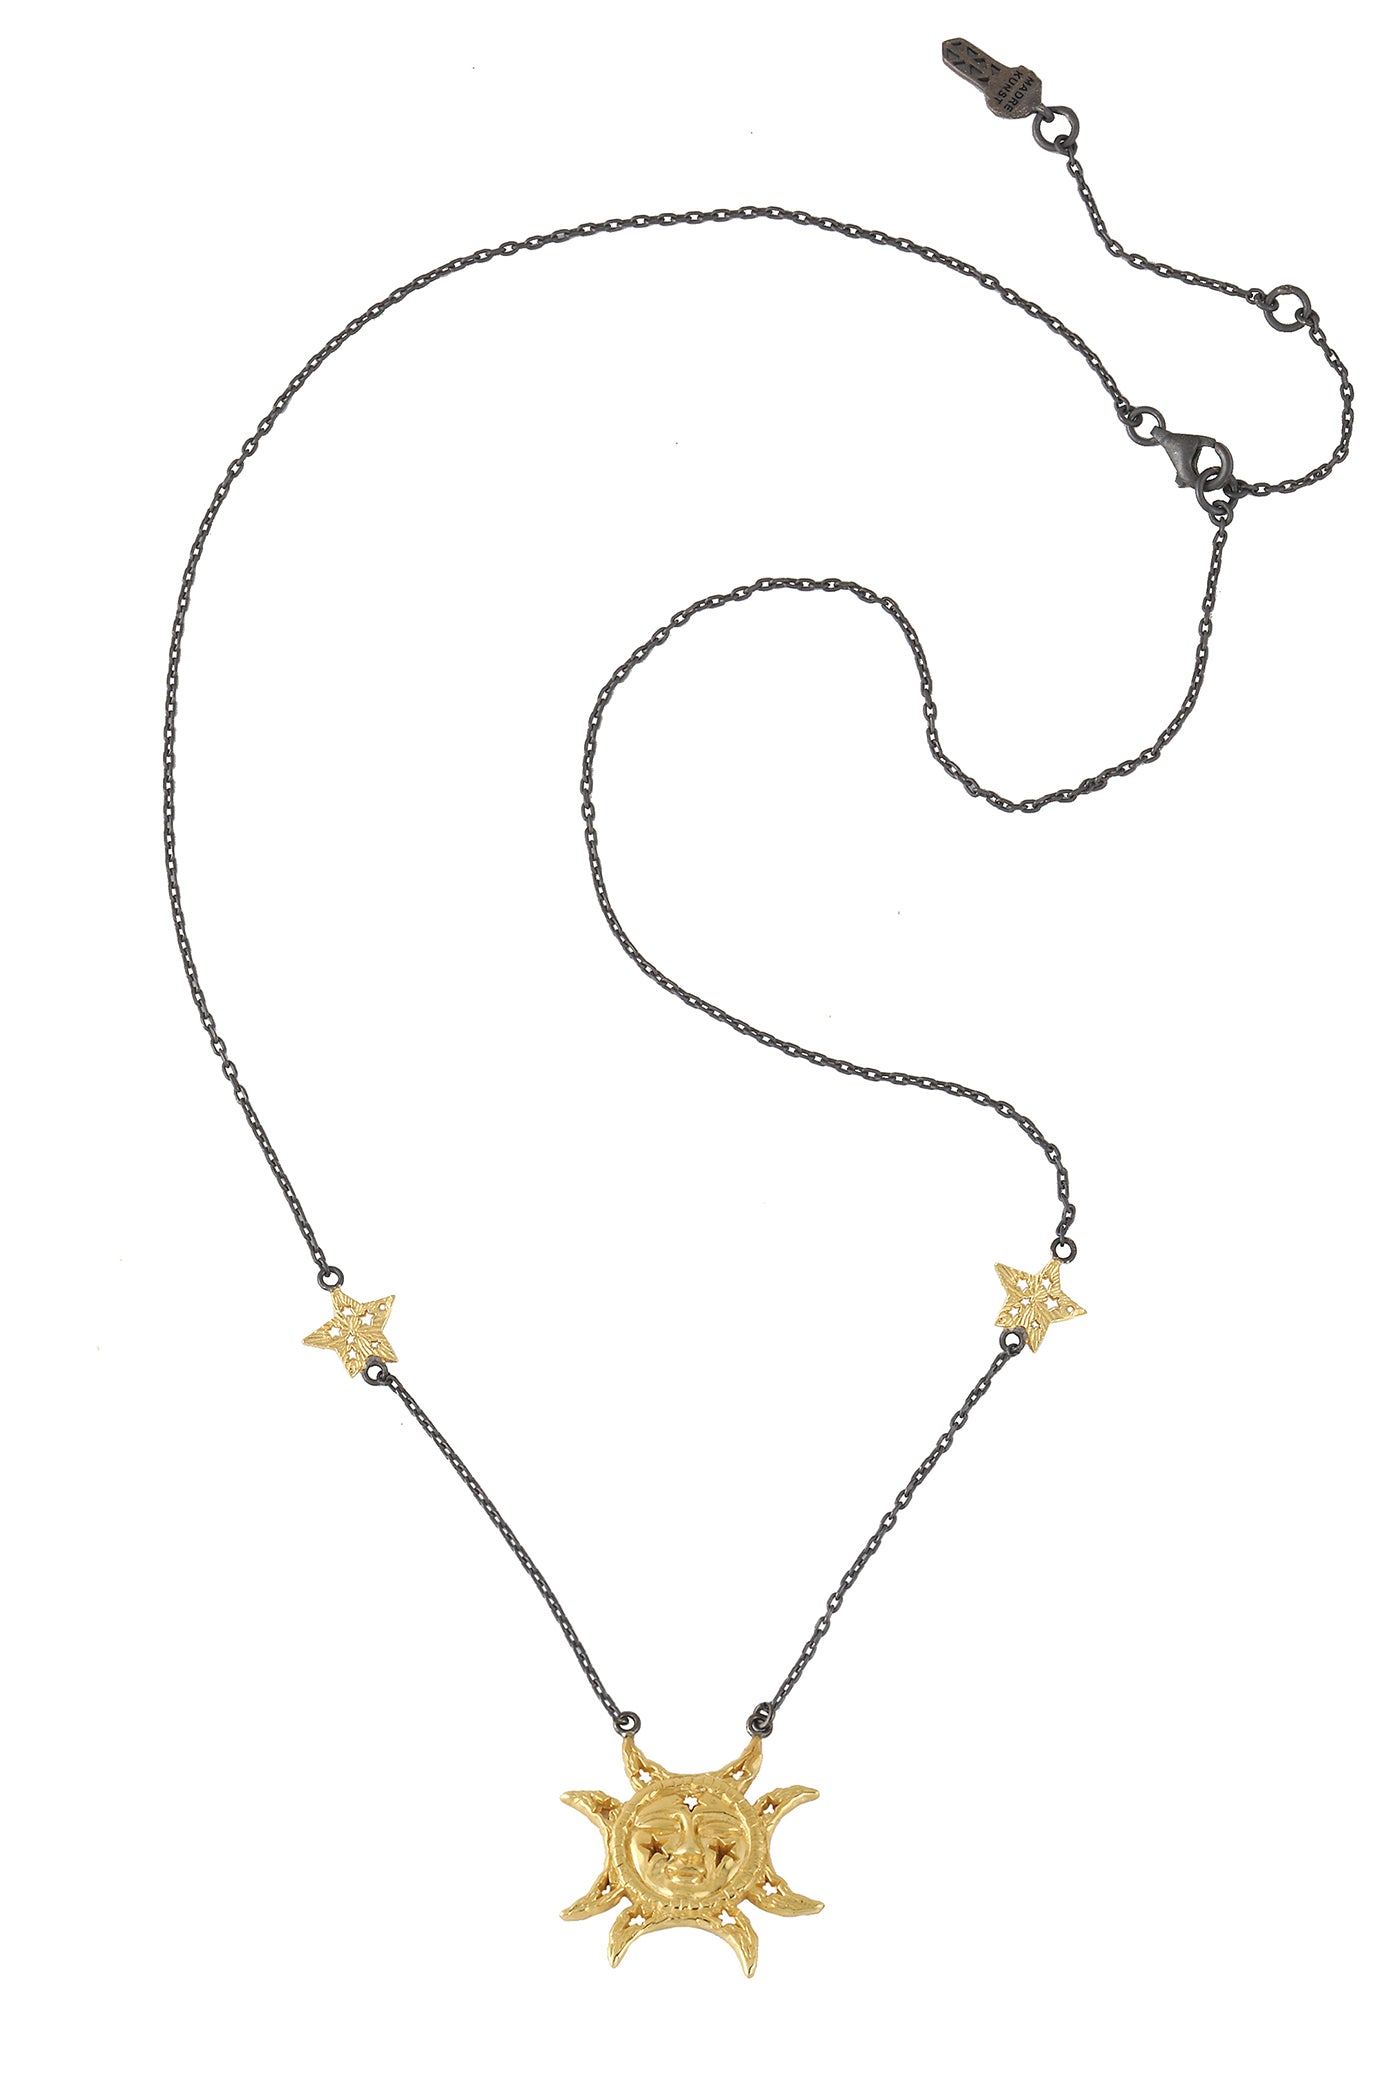 Magic Moon face with 2 stars on the chain necklace. Silver, gold-plated, oxidized